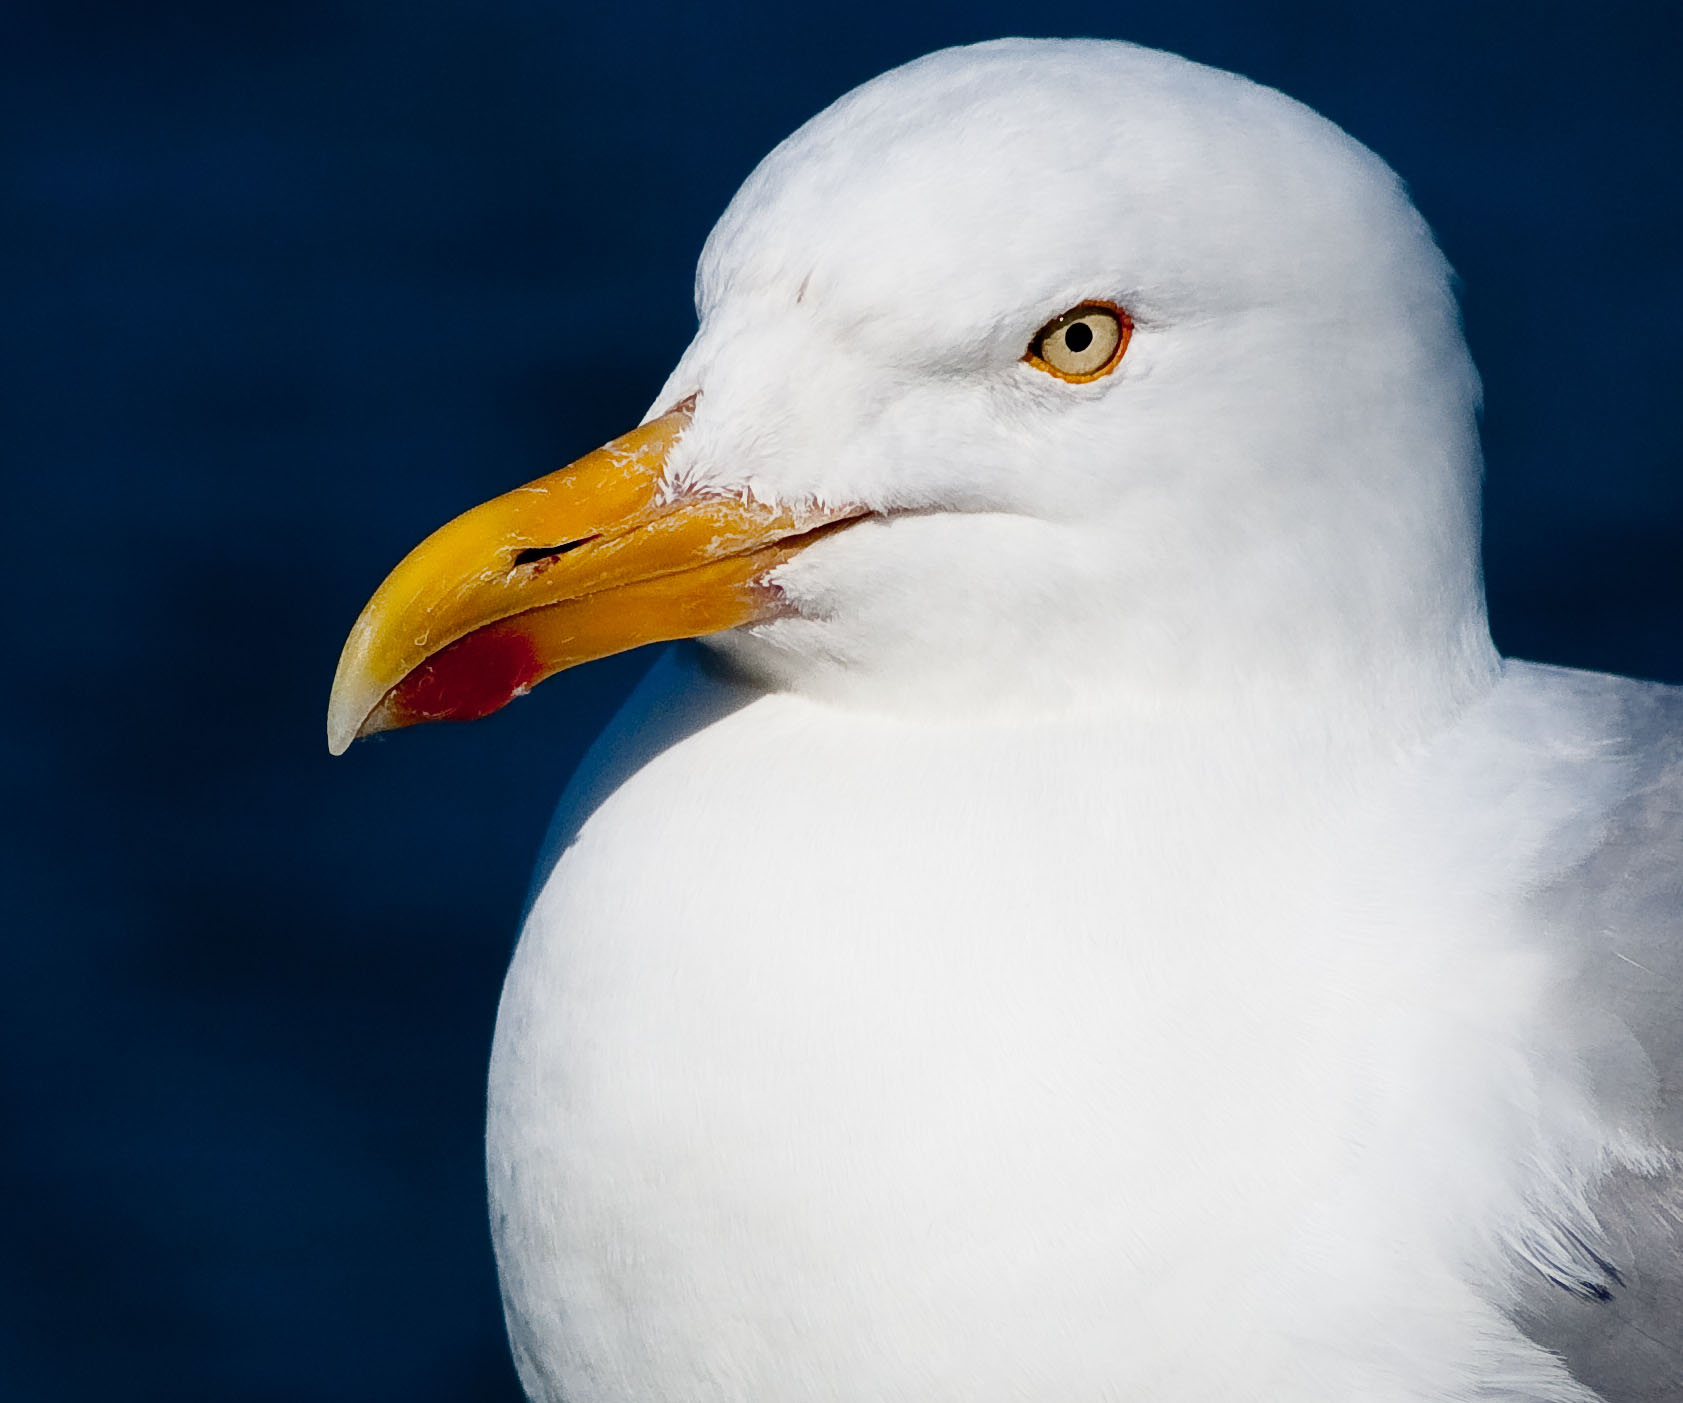 The seagull story that’s gone viral